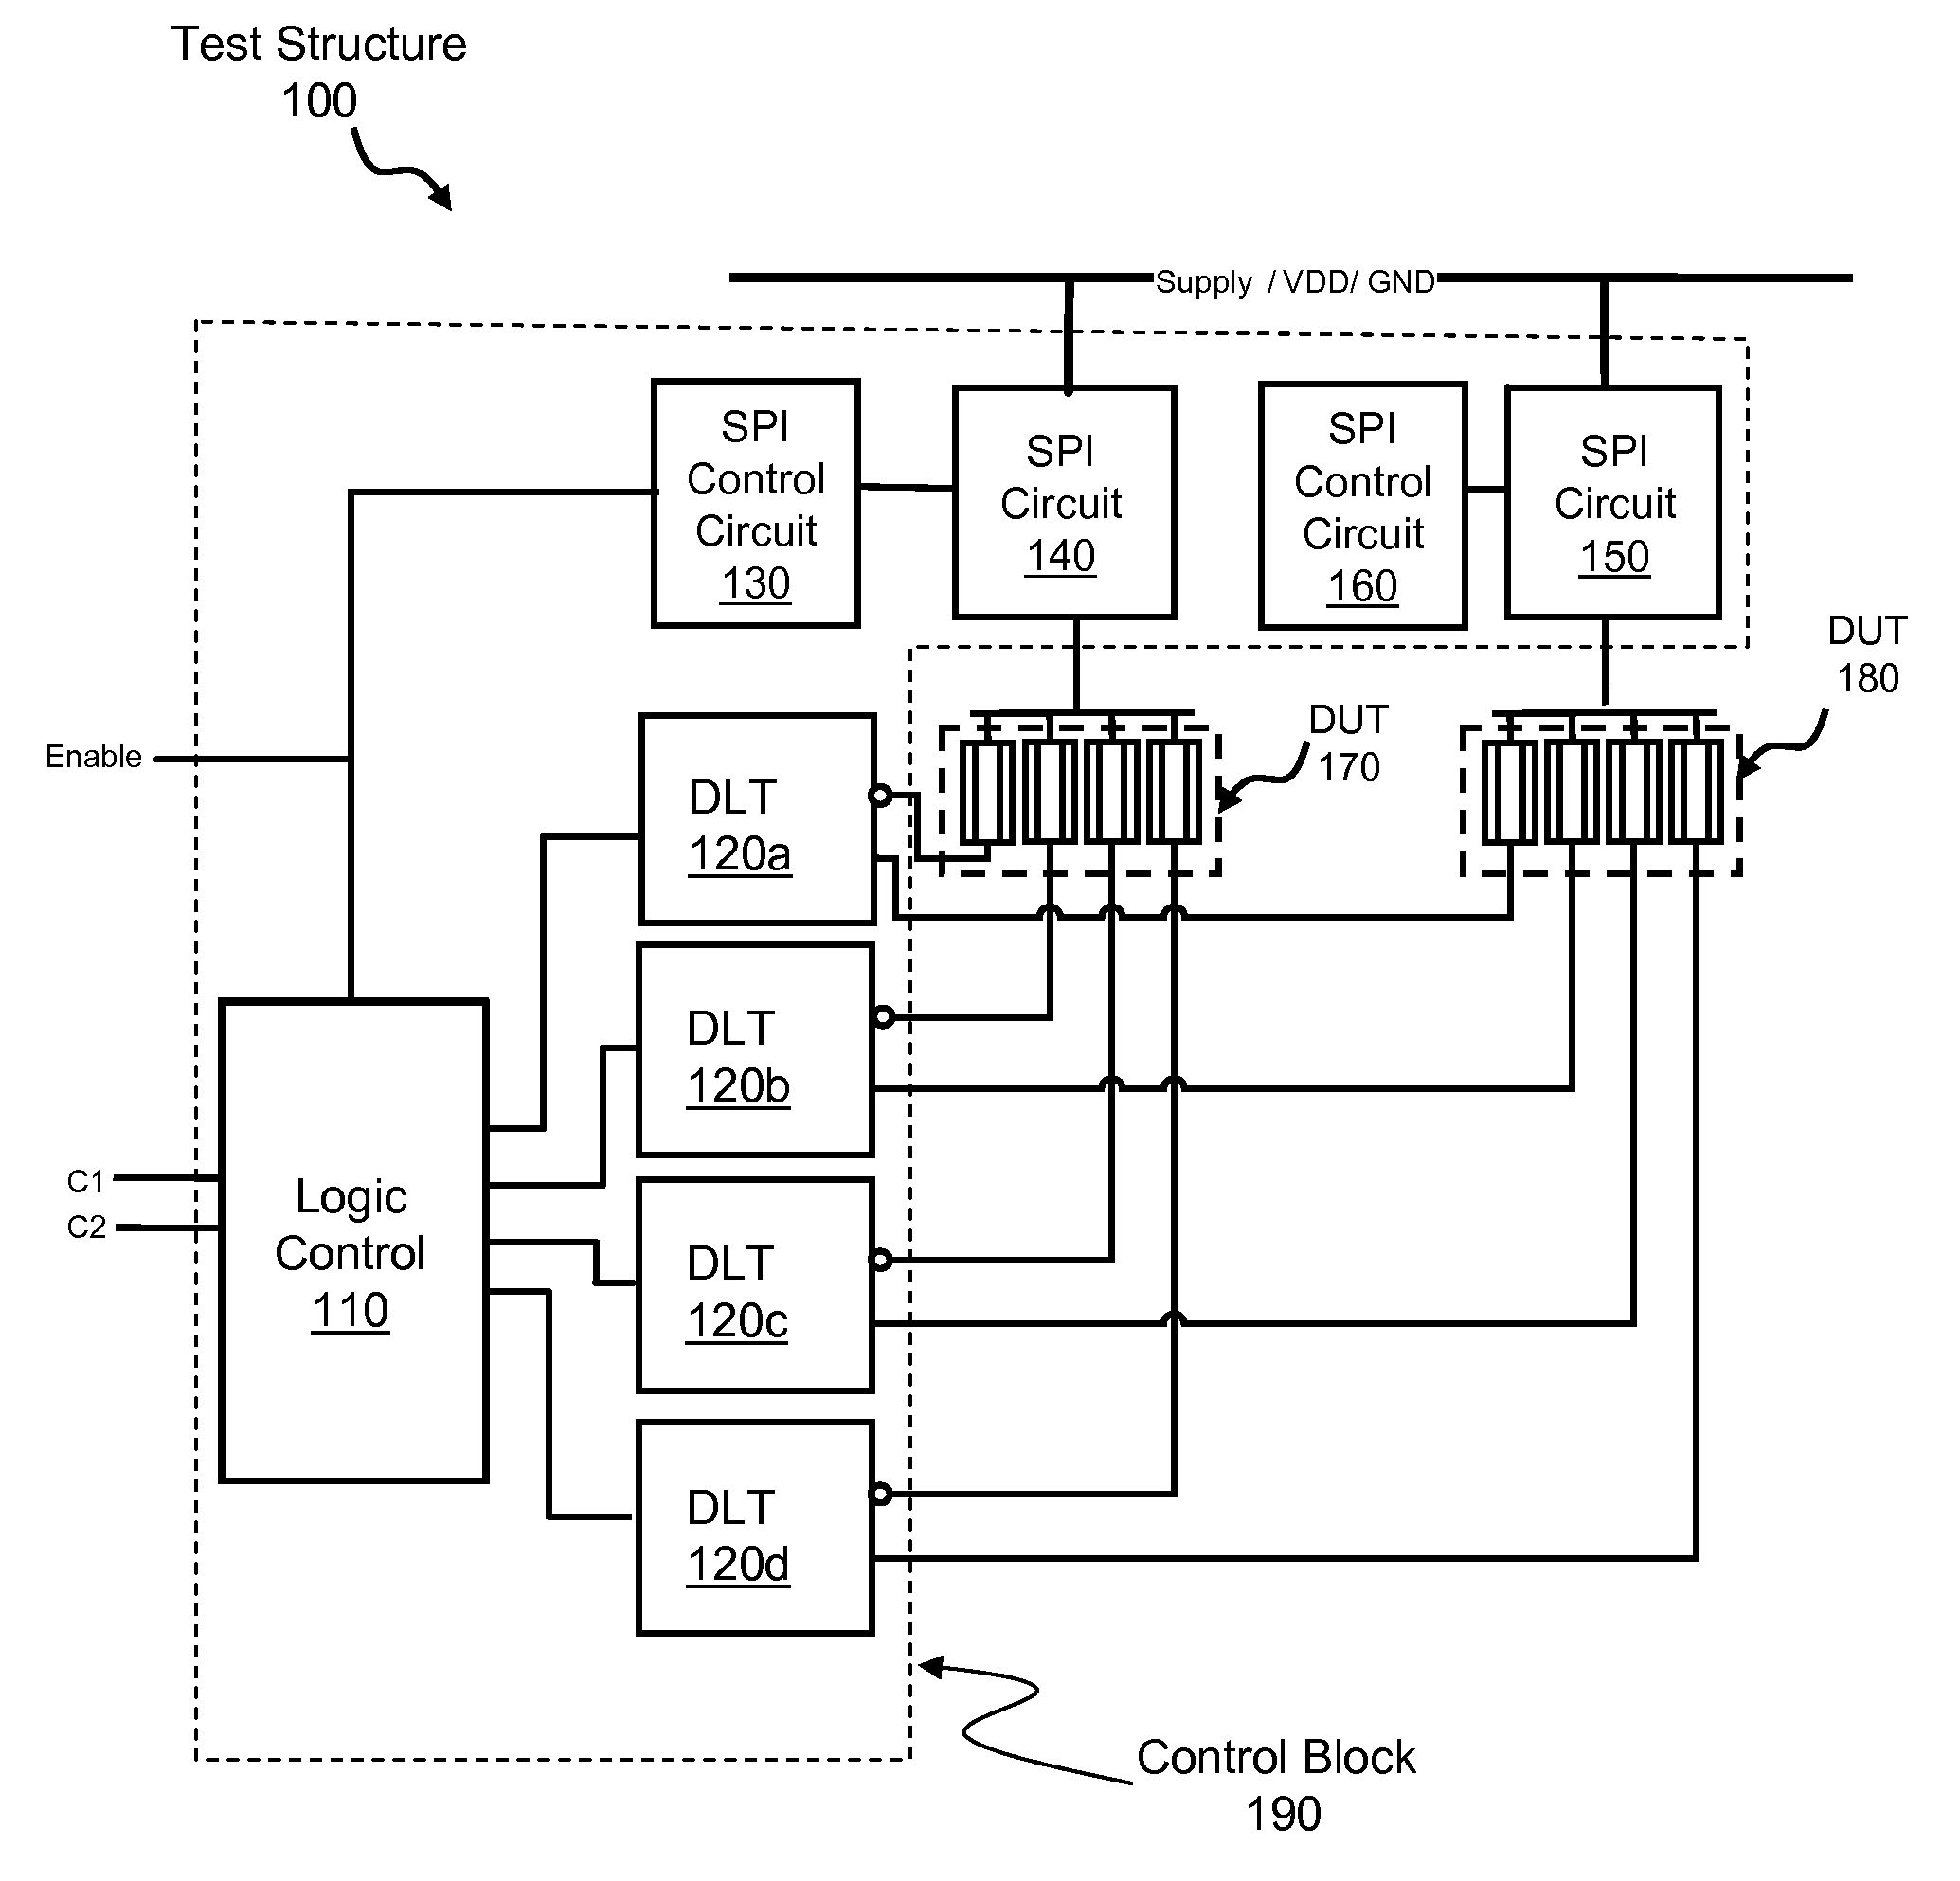 System for and Method of Integrating Test Structures into an Integrated Circuit